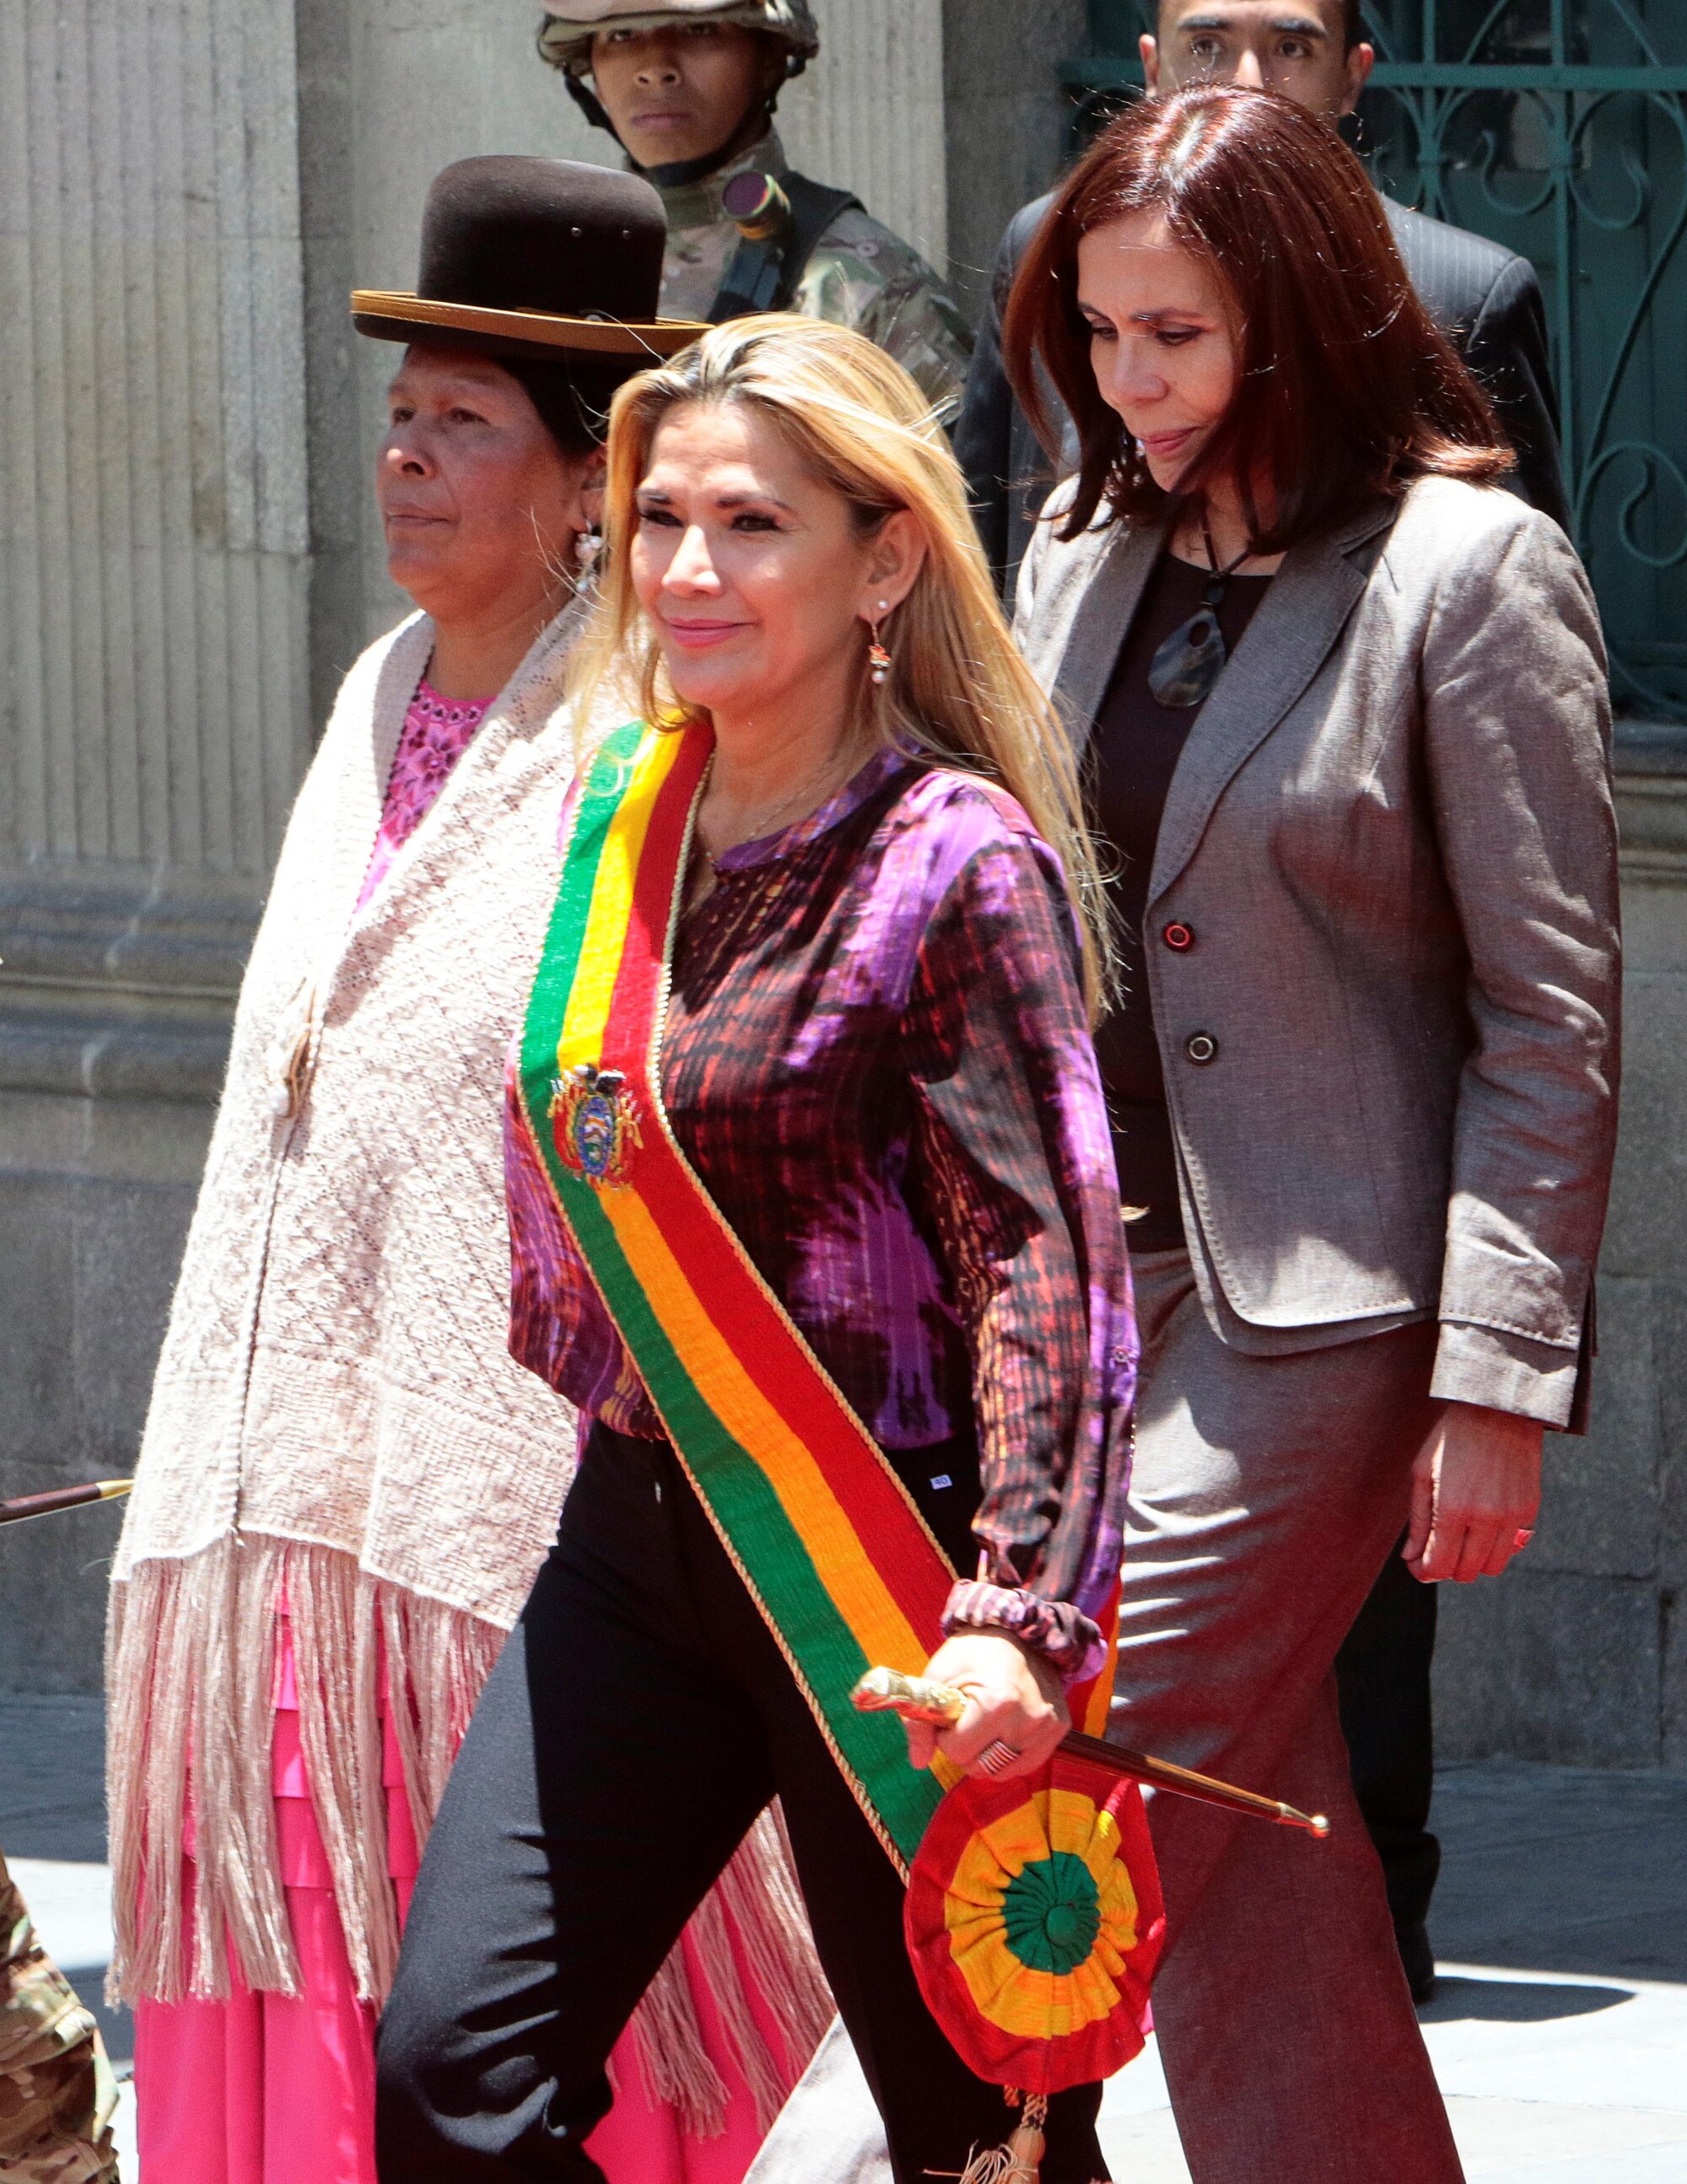 Bolivias interim president cancels trip due to credible threat as crisis roars on